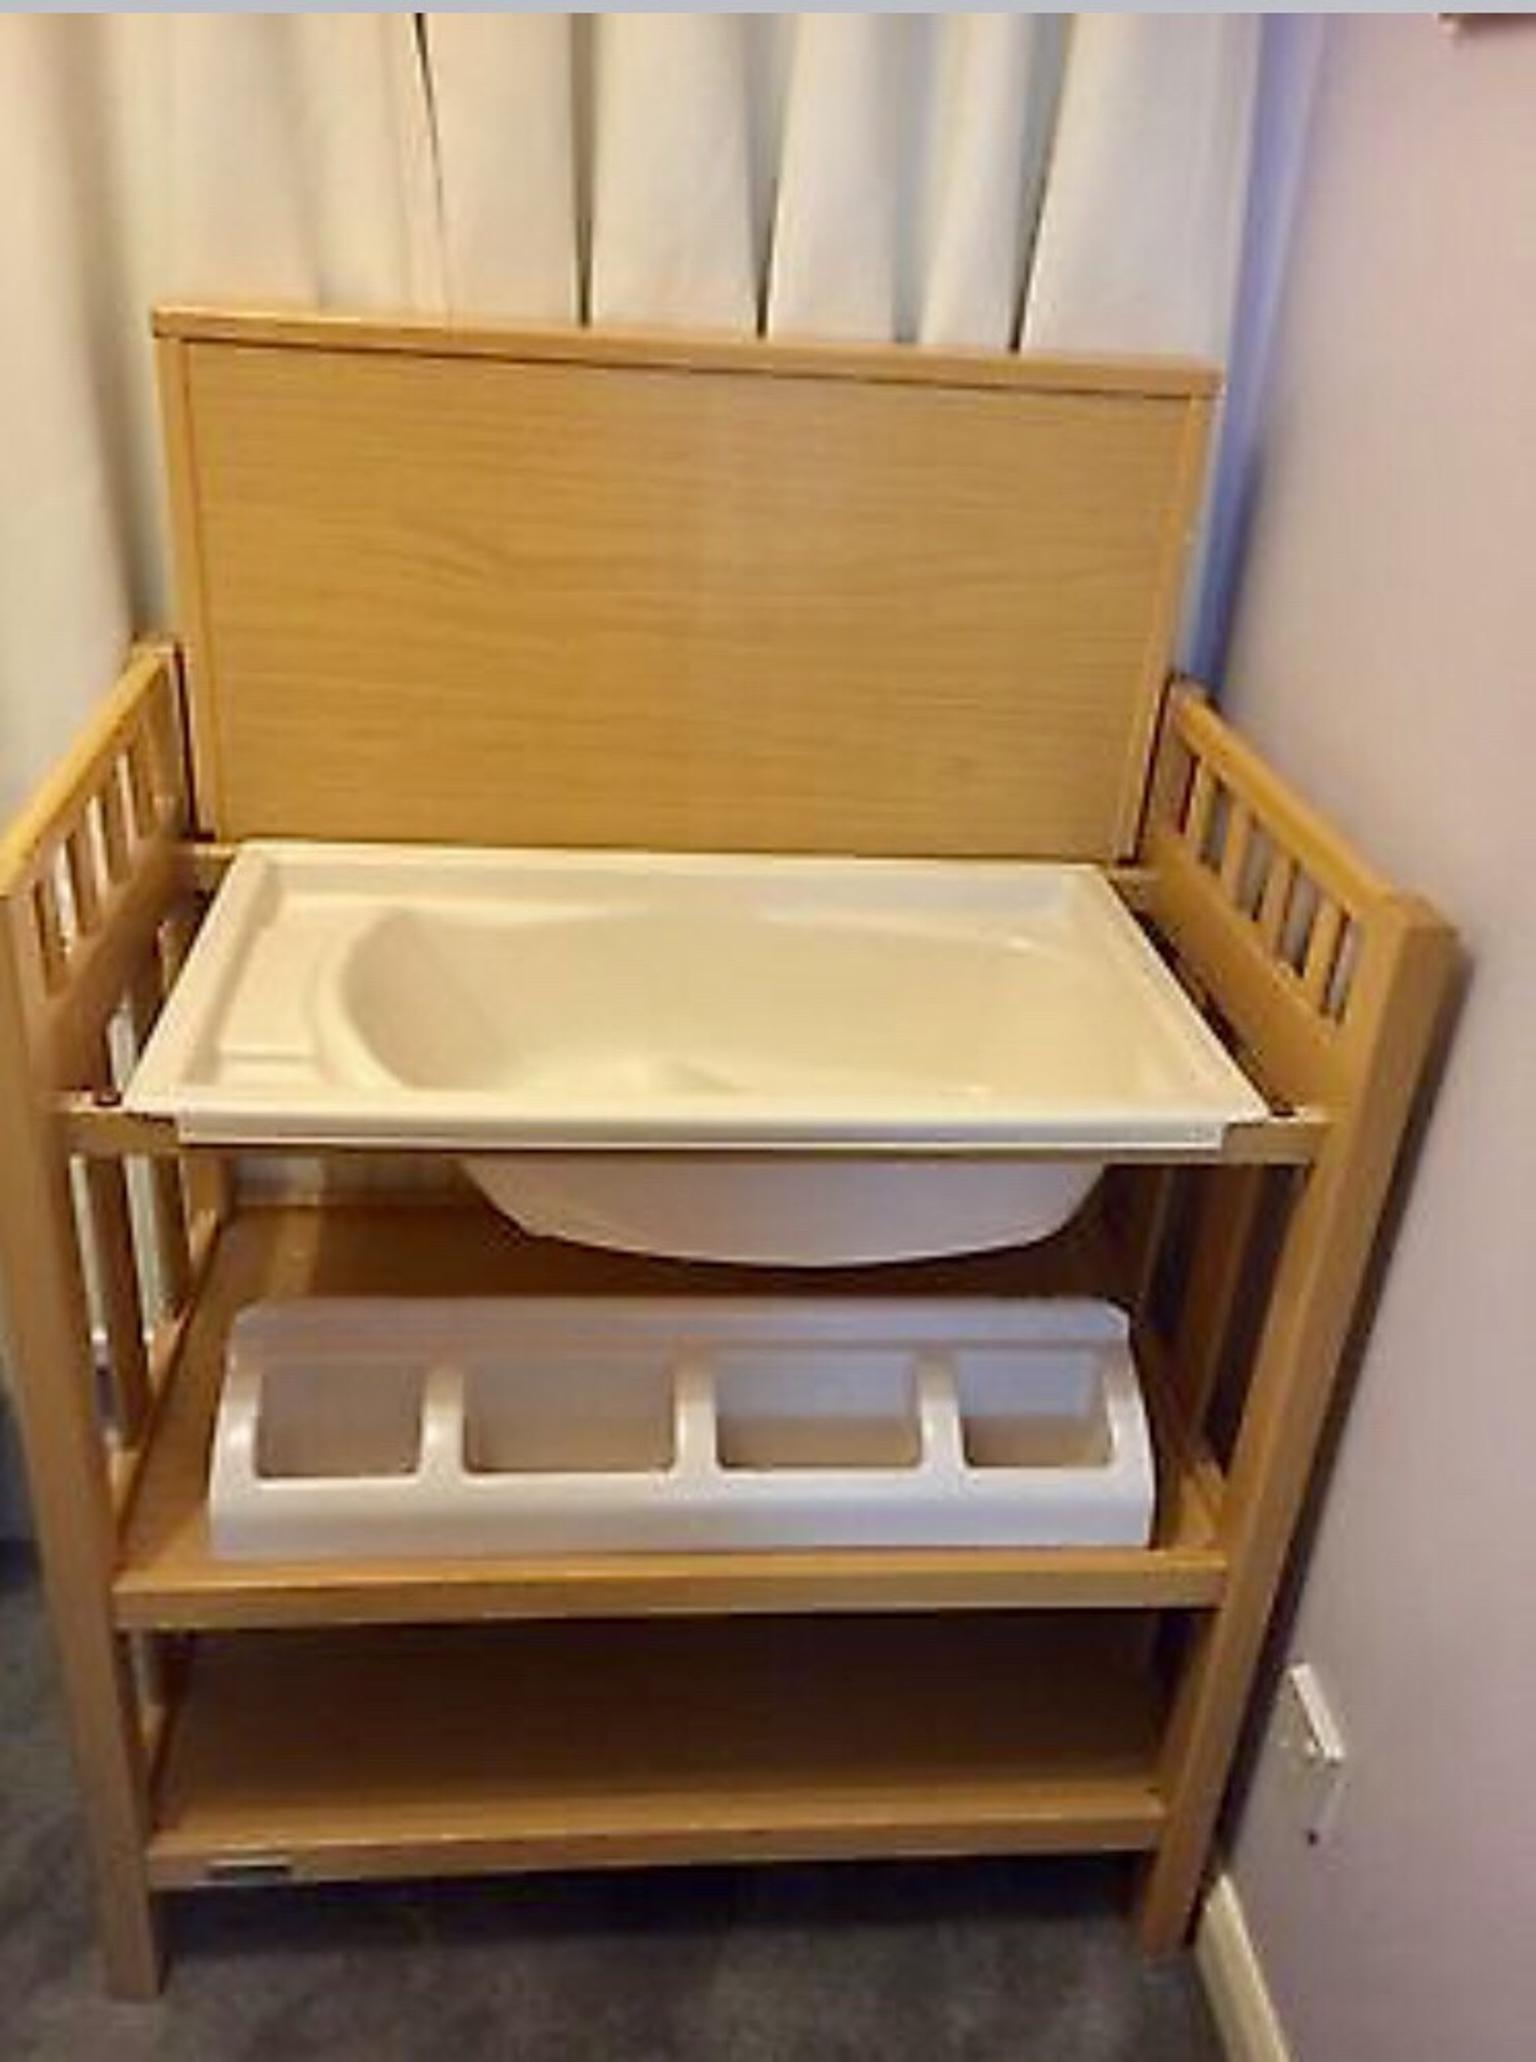 mamas and papas wooden changing unit